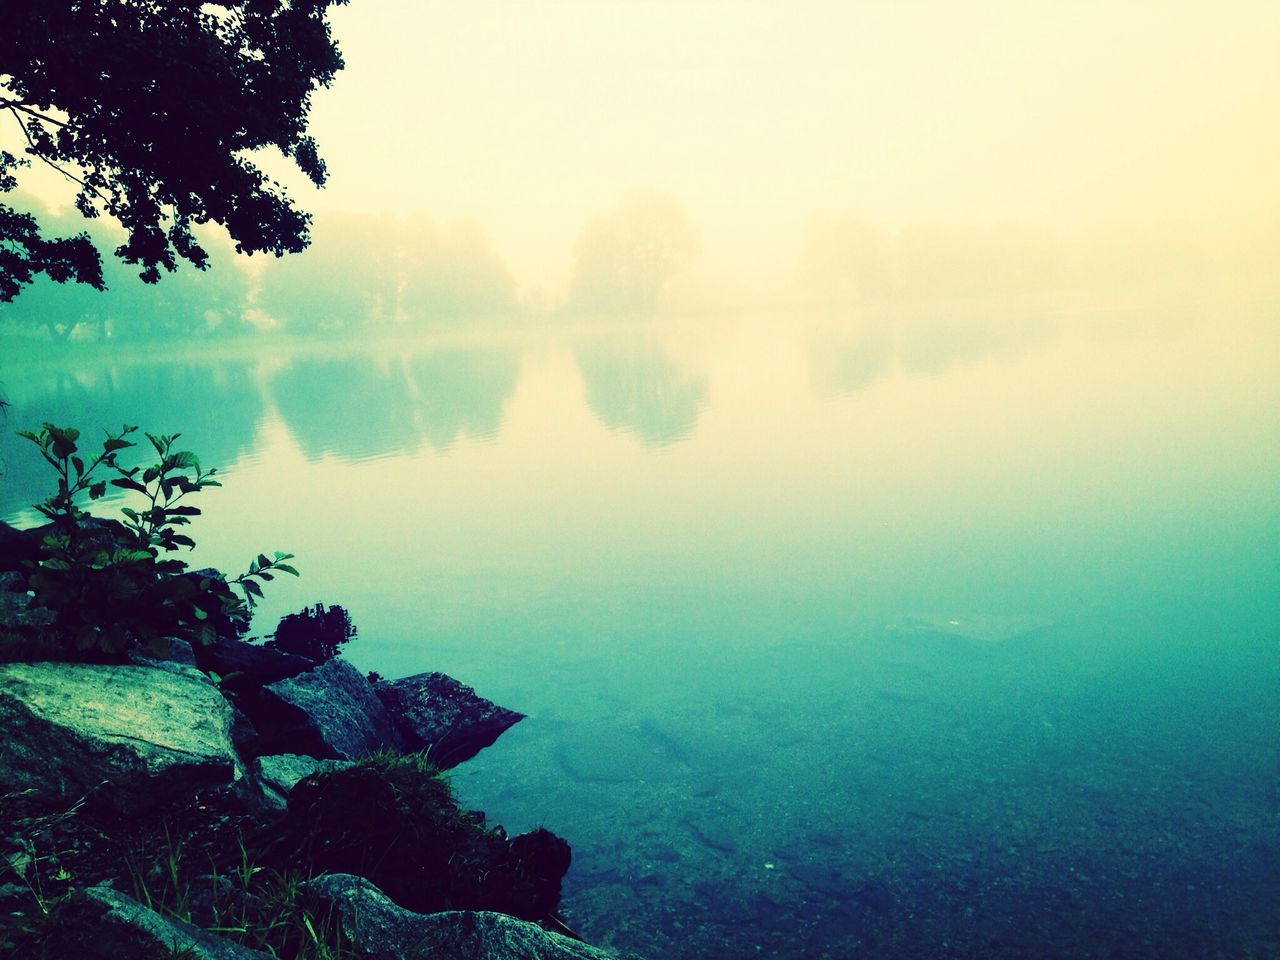 tranquil scene, tranquility, scenics, beauty in nature, water, tree, sky, nature, rock - object, idyllic, fog, non-urban scene, lake, reflection, landscape, outdoors, day, remote, calm, no people